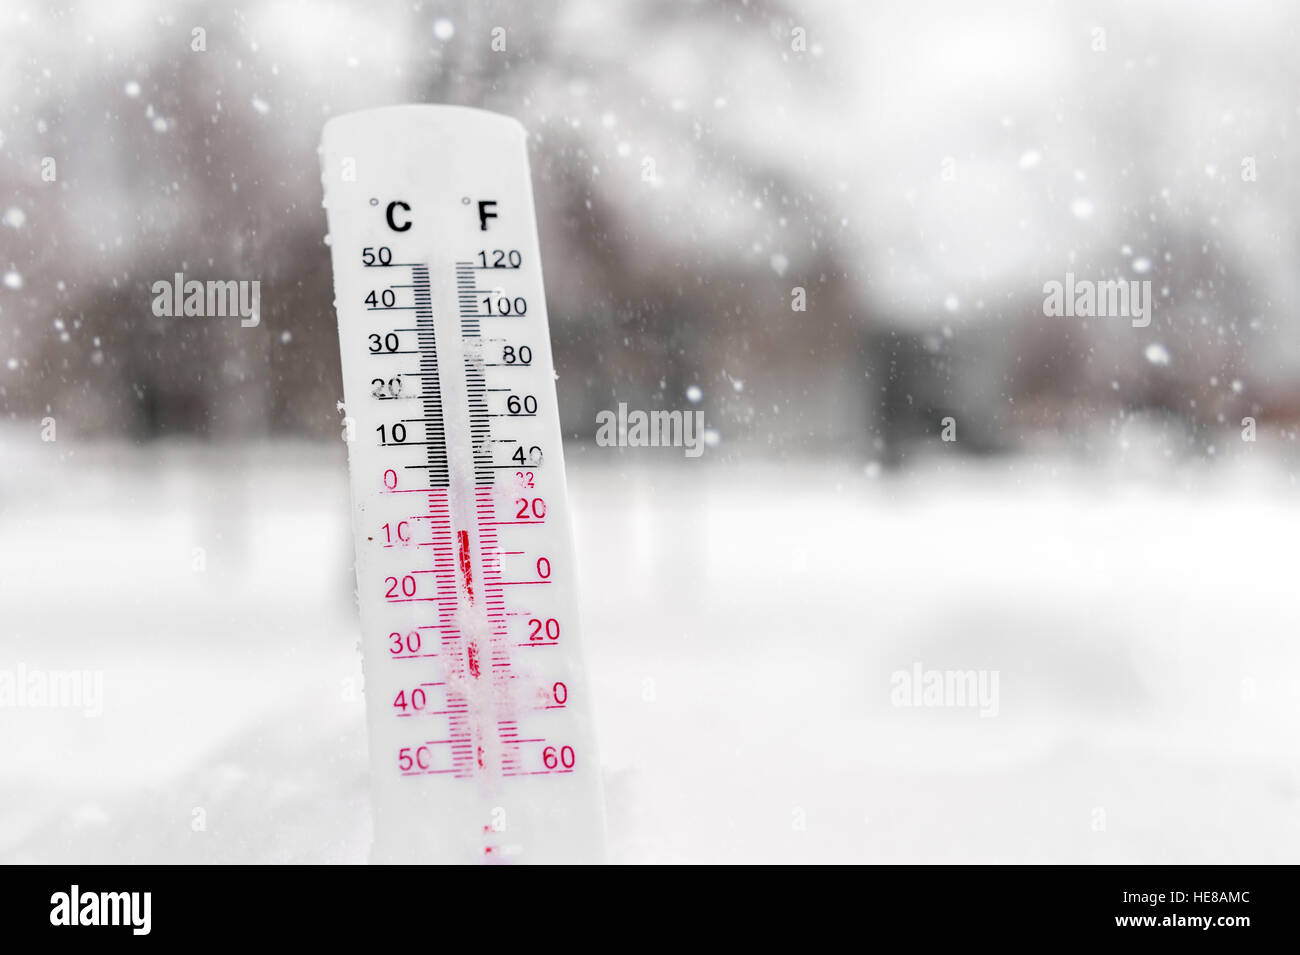 Thermometer on snow showing very low temperature Stock Photo